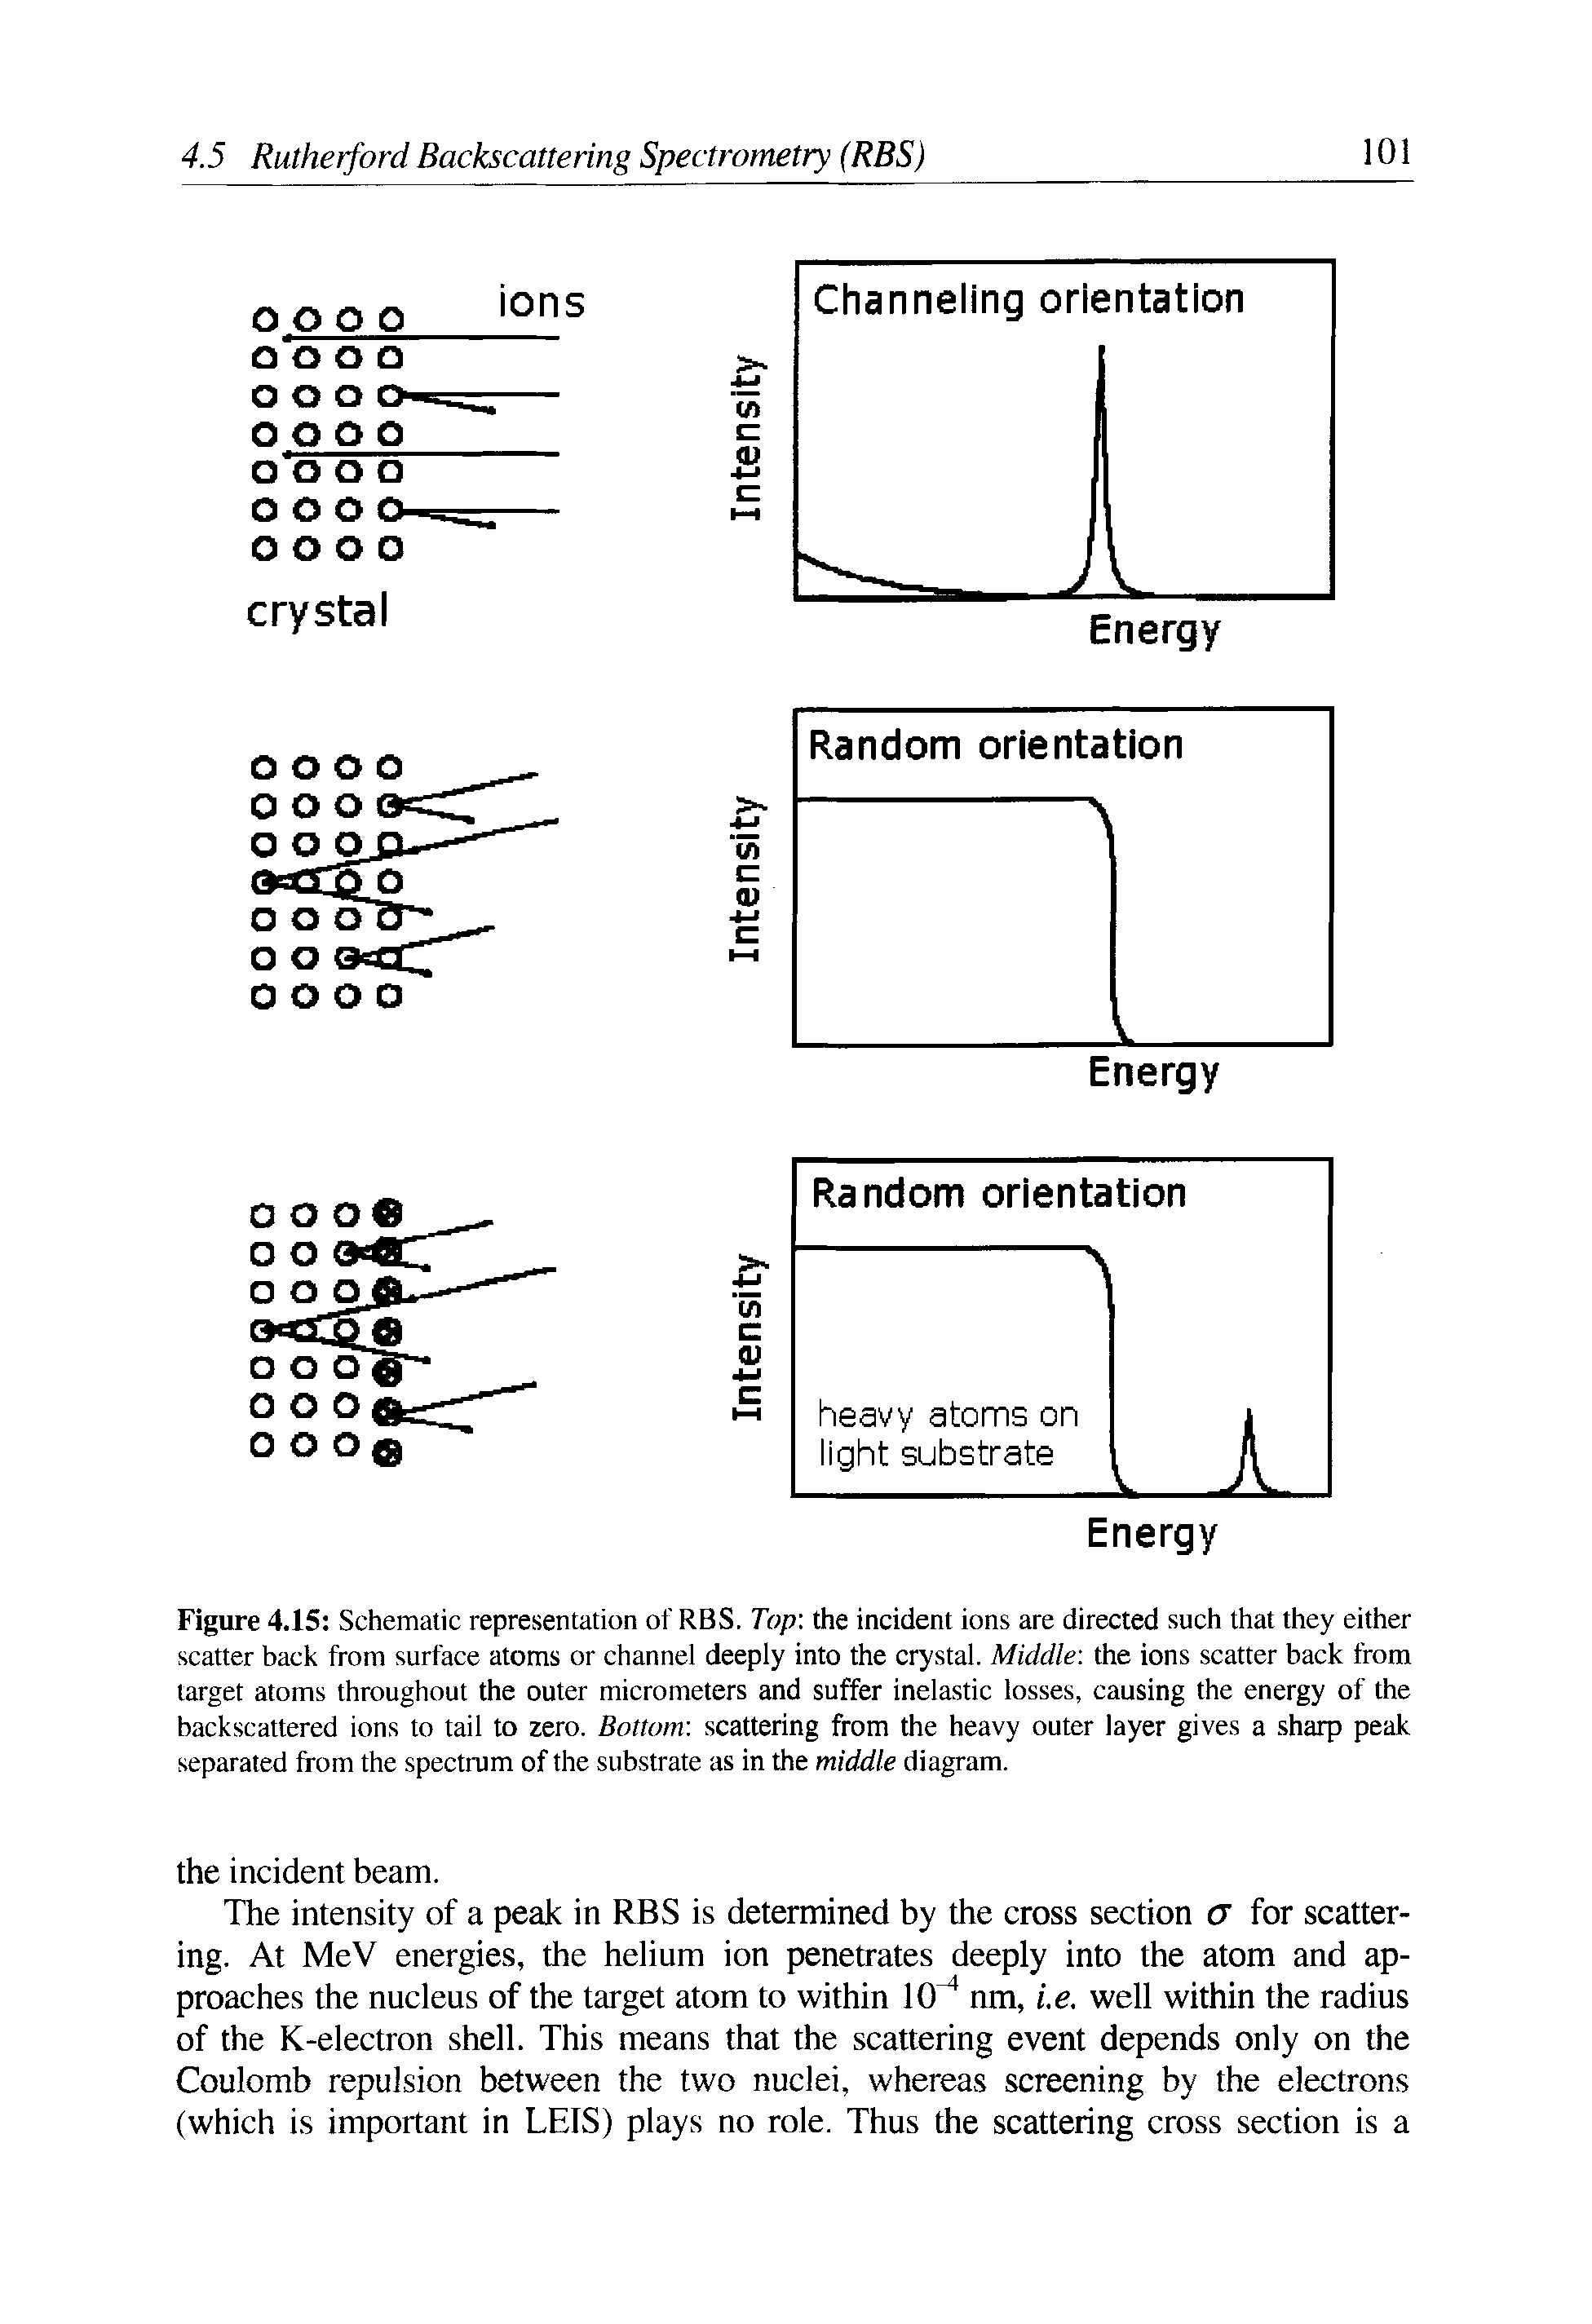 Figure 4.15 Schematic representation of RBS. Top the incident ions are directed such that they either scatter back from surface atoms or channel deeply into the crystal. Middle the ions scatter back from target atoms throughout the outer micrometers and suffer inelastic losses, causing the energy of the backscattered ions to tail to zero. Bottom scattering from the heavy outer layer gives a sharp peak separated from the spectrum of the substrate as in the middle diagram.